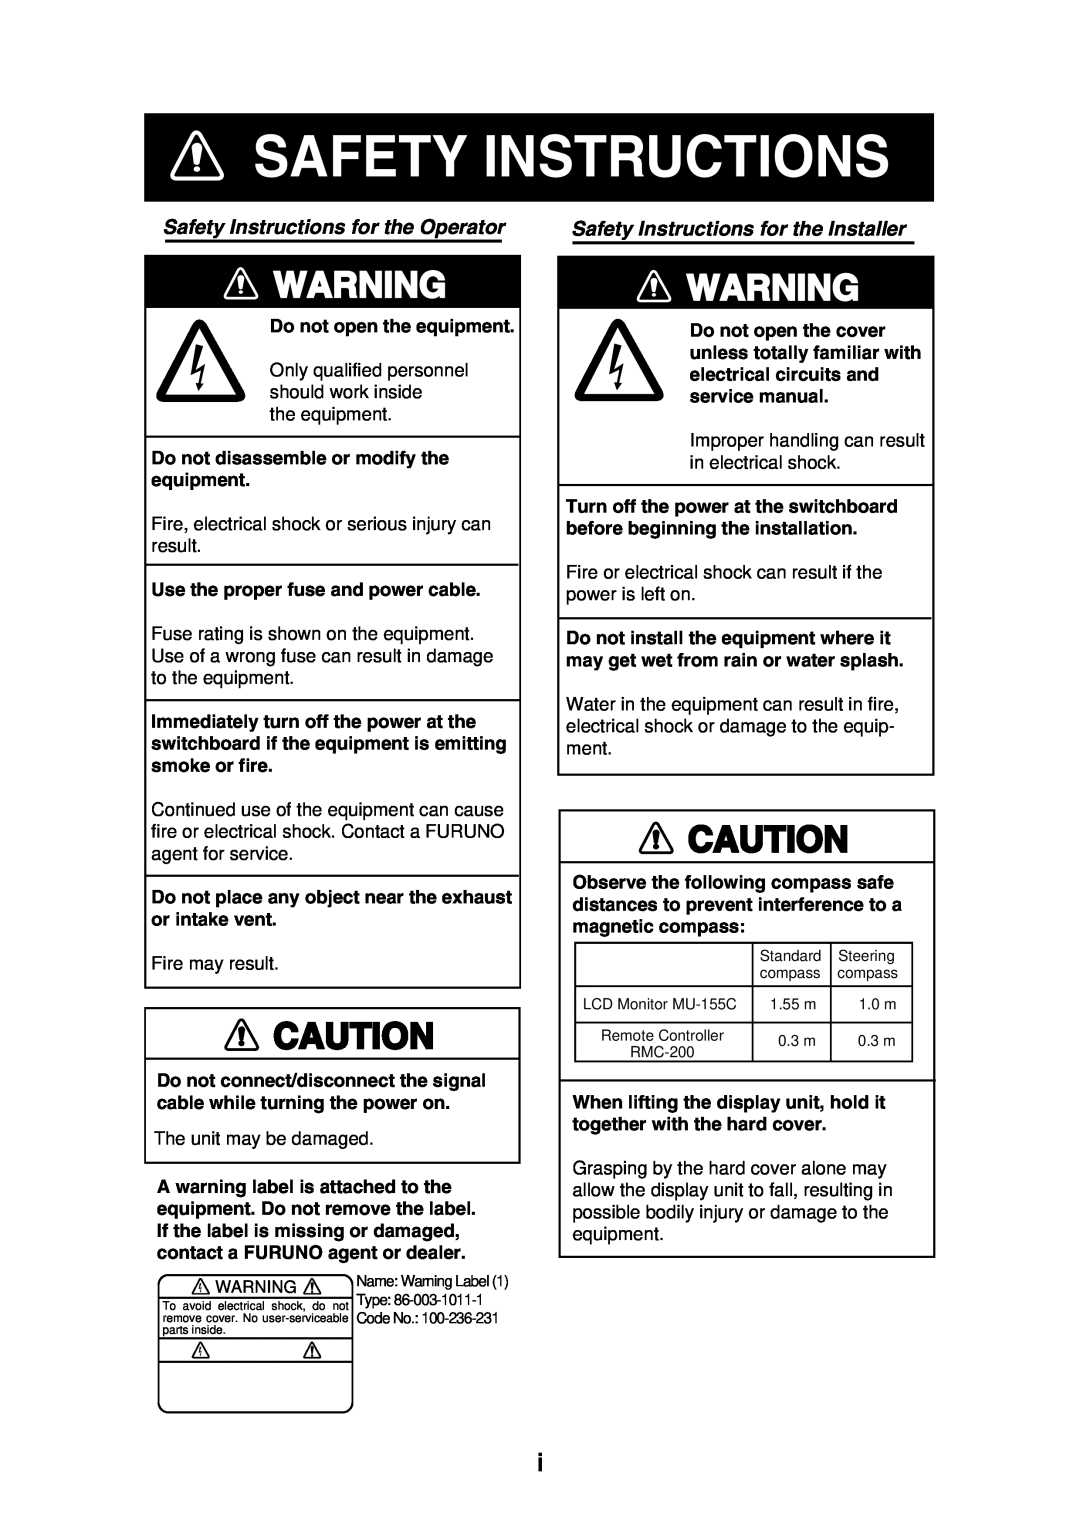 Furuno MU-155C Safety Instructions for the Operator, Safety Instructions for the Installer, Do not open the equipment 